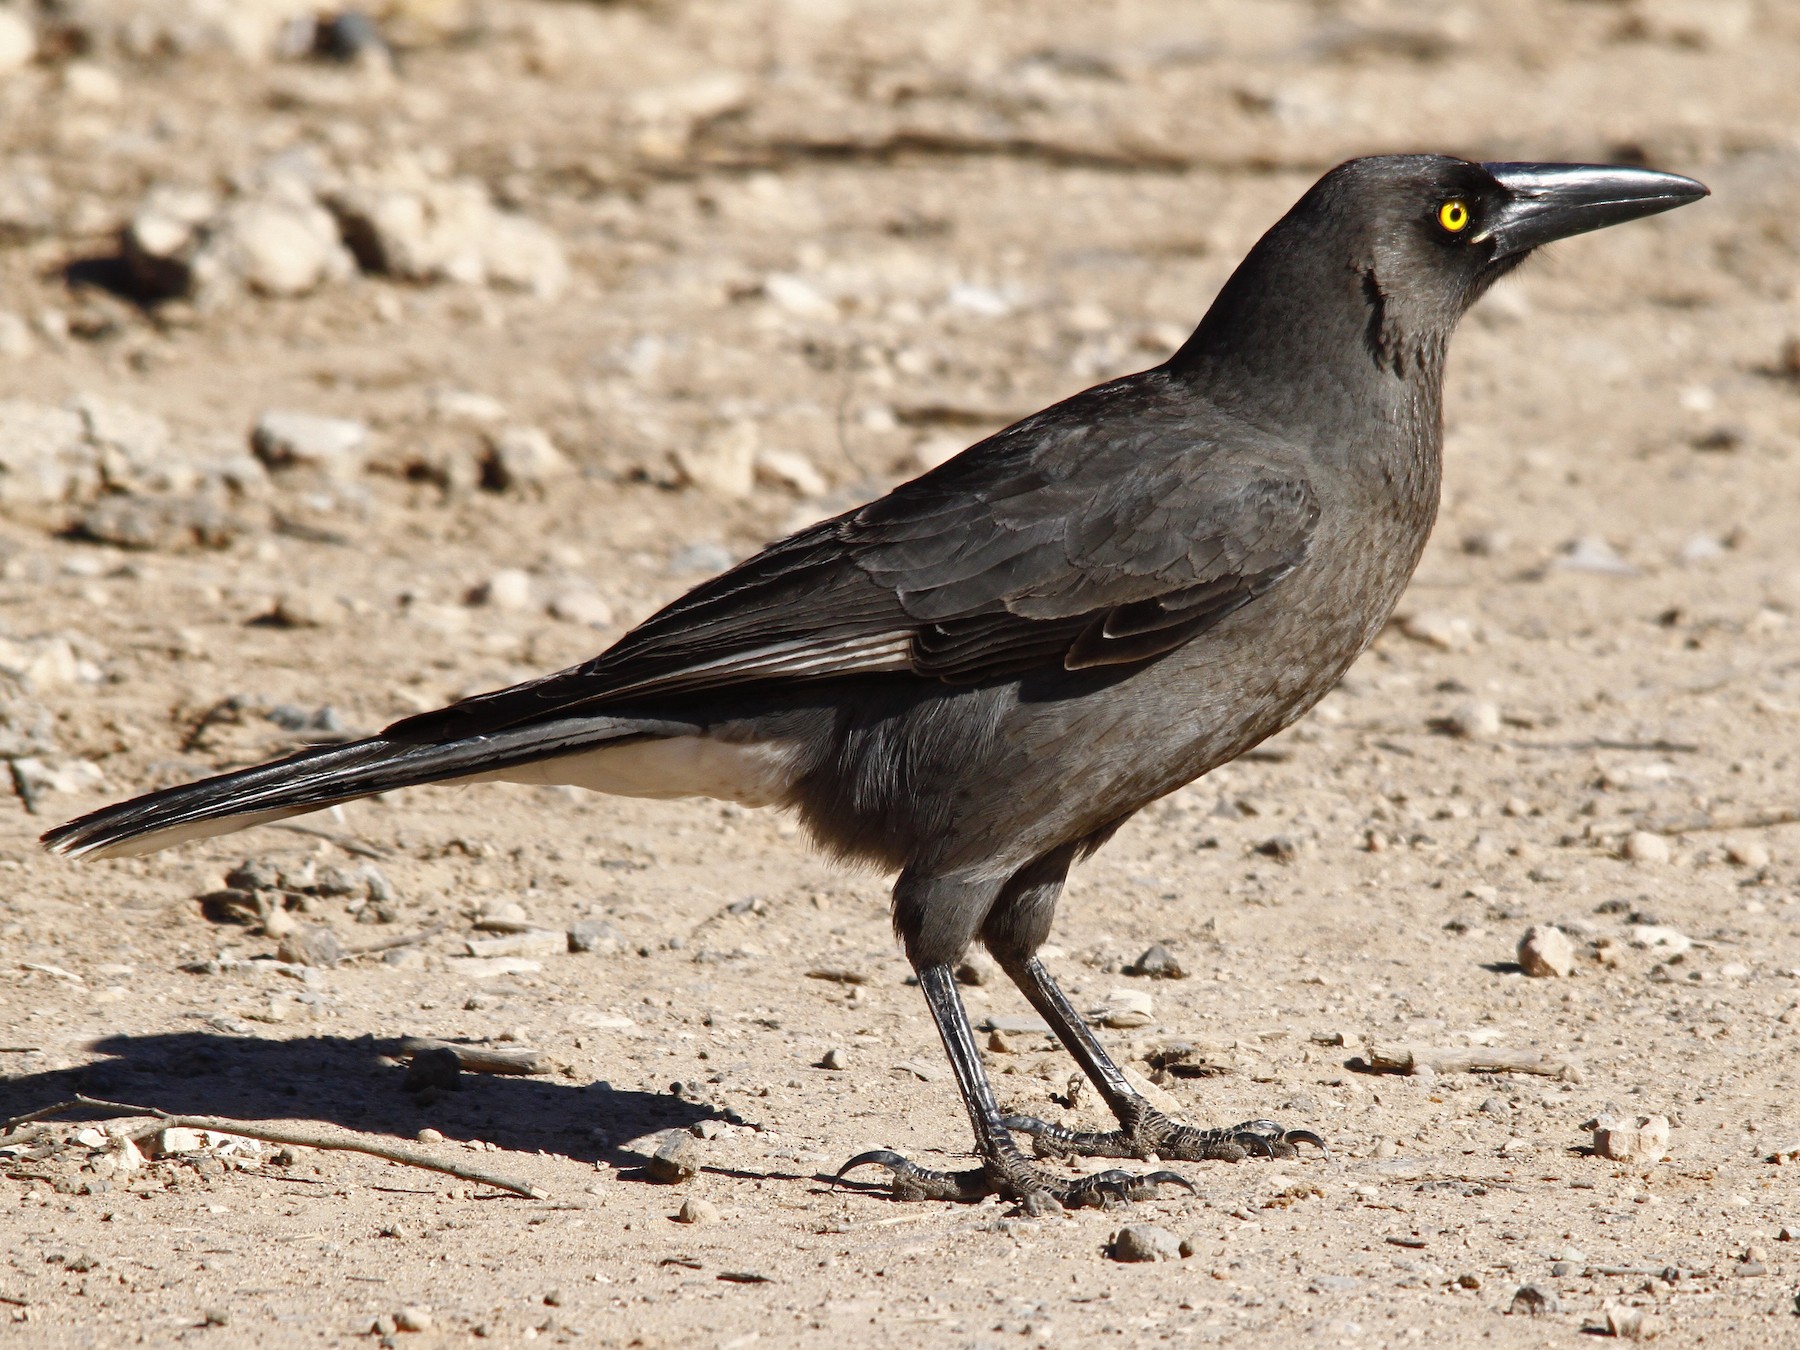 pied currawong, scientific name Strepera graculina